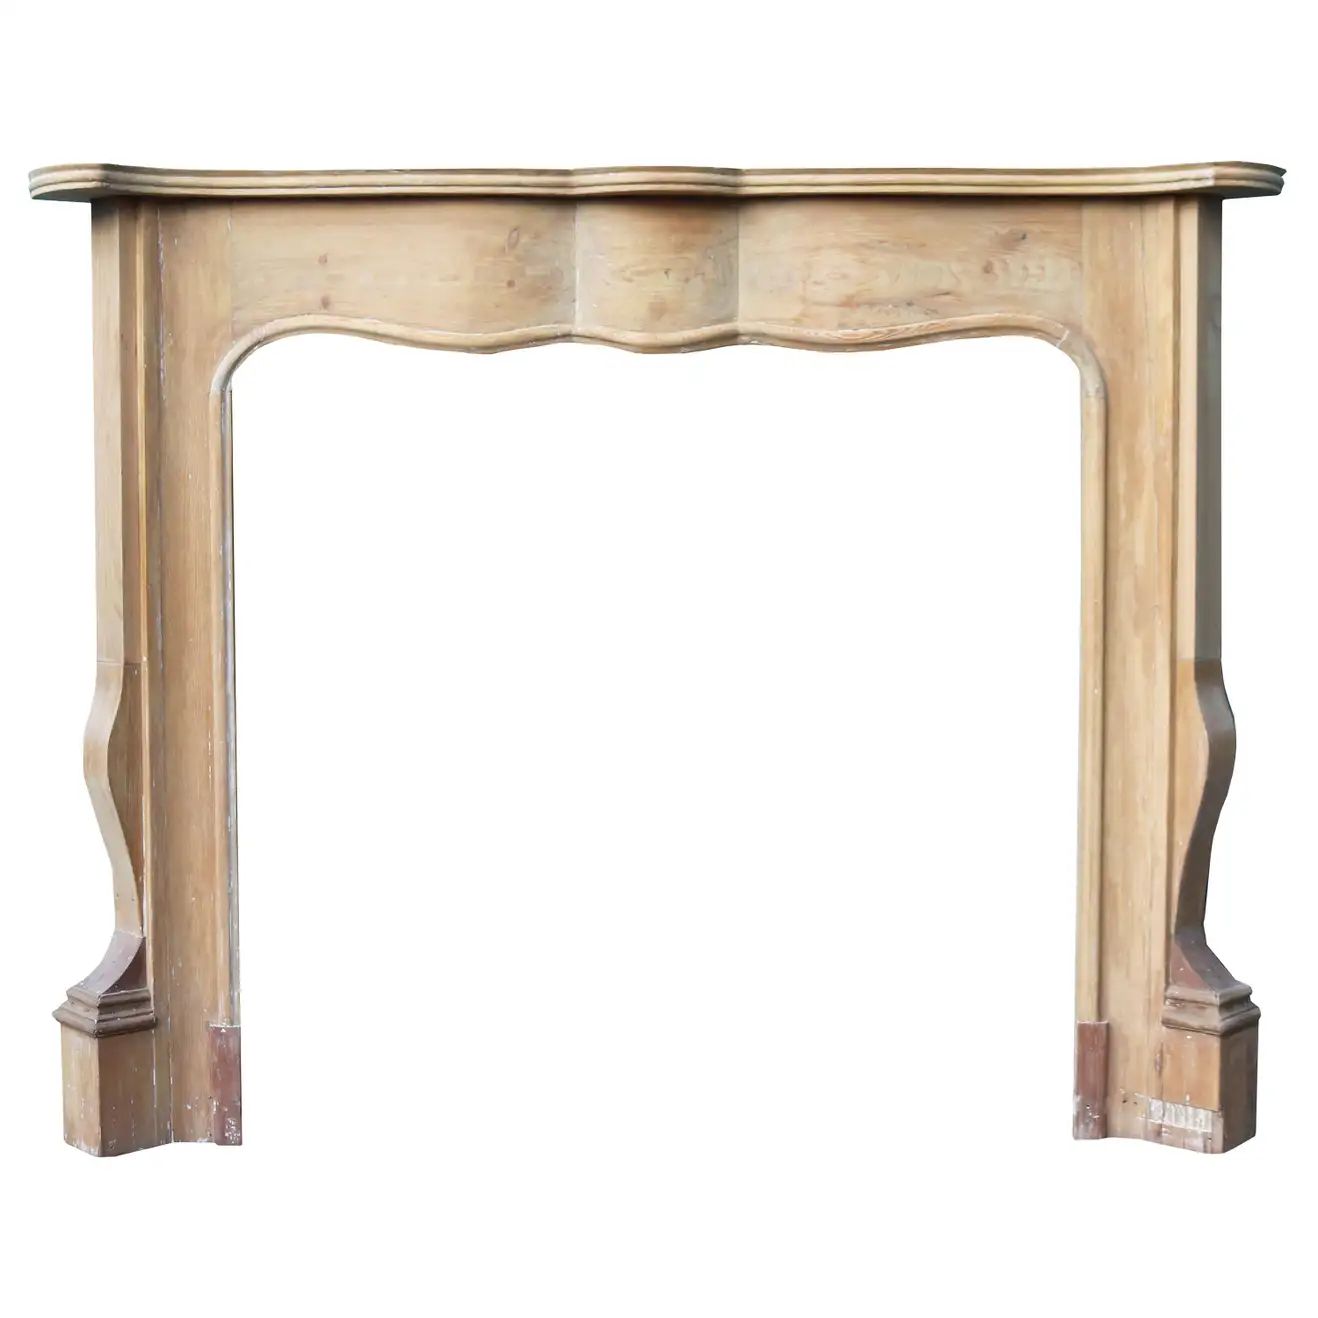 Reclaimed Louis XV Style Sire Surround | 1stDibs